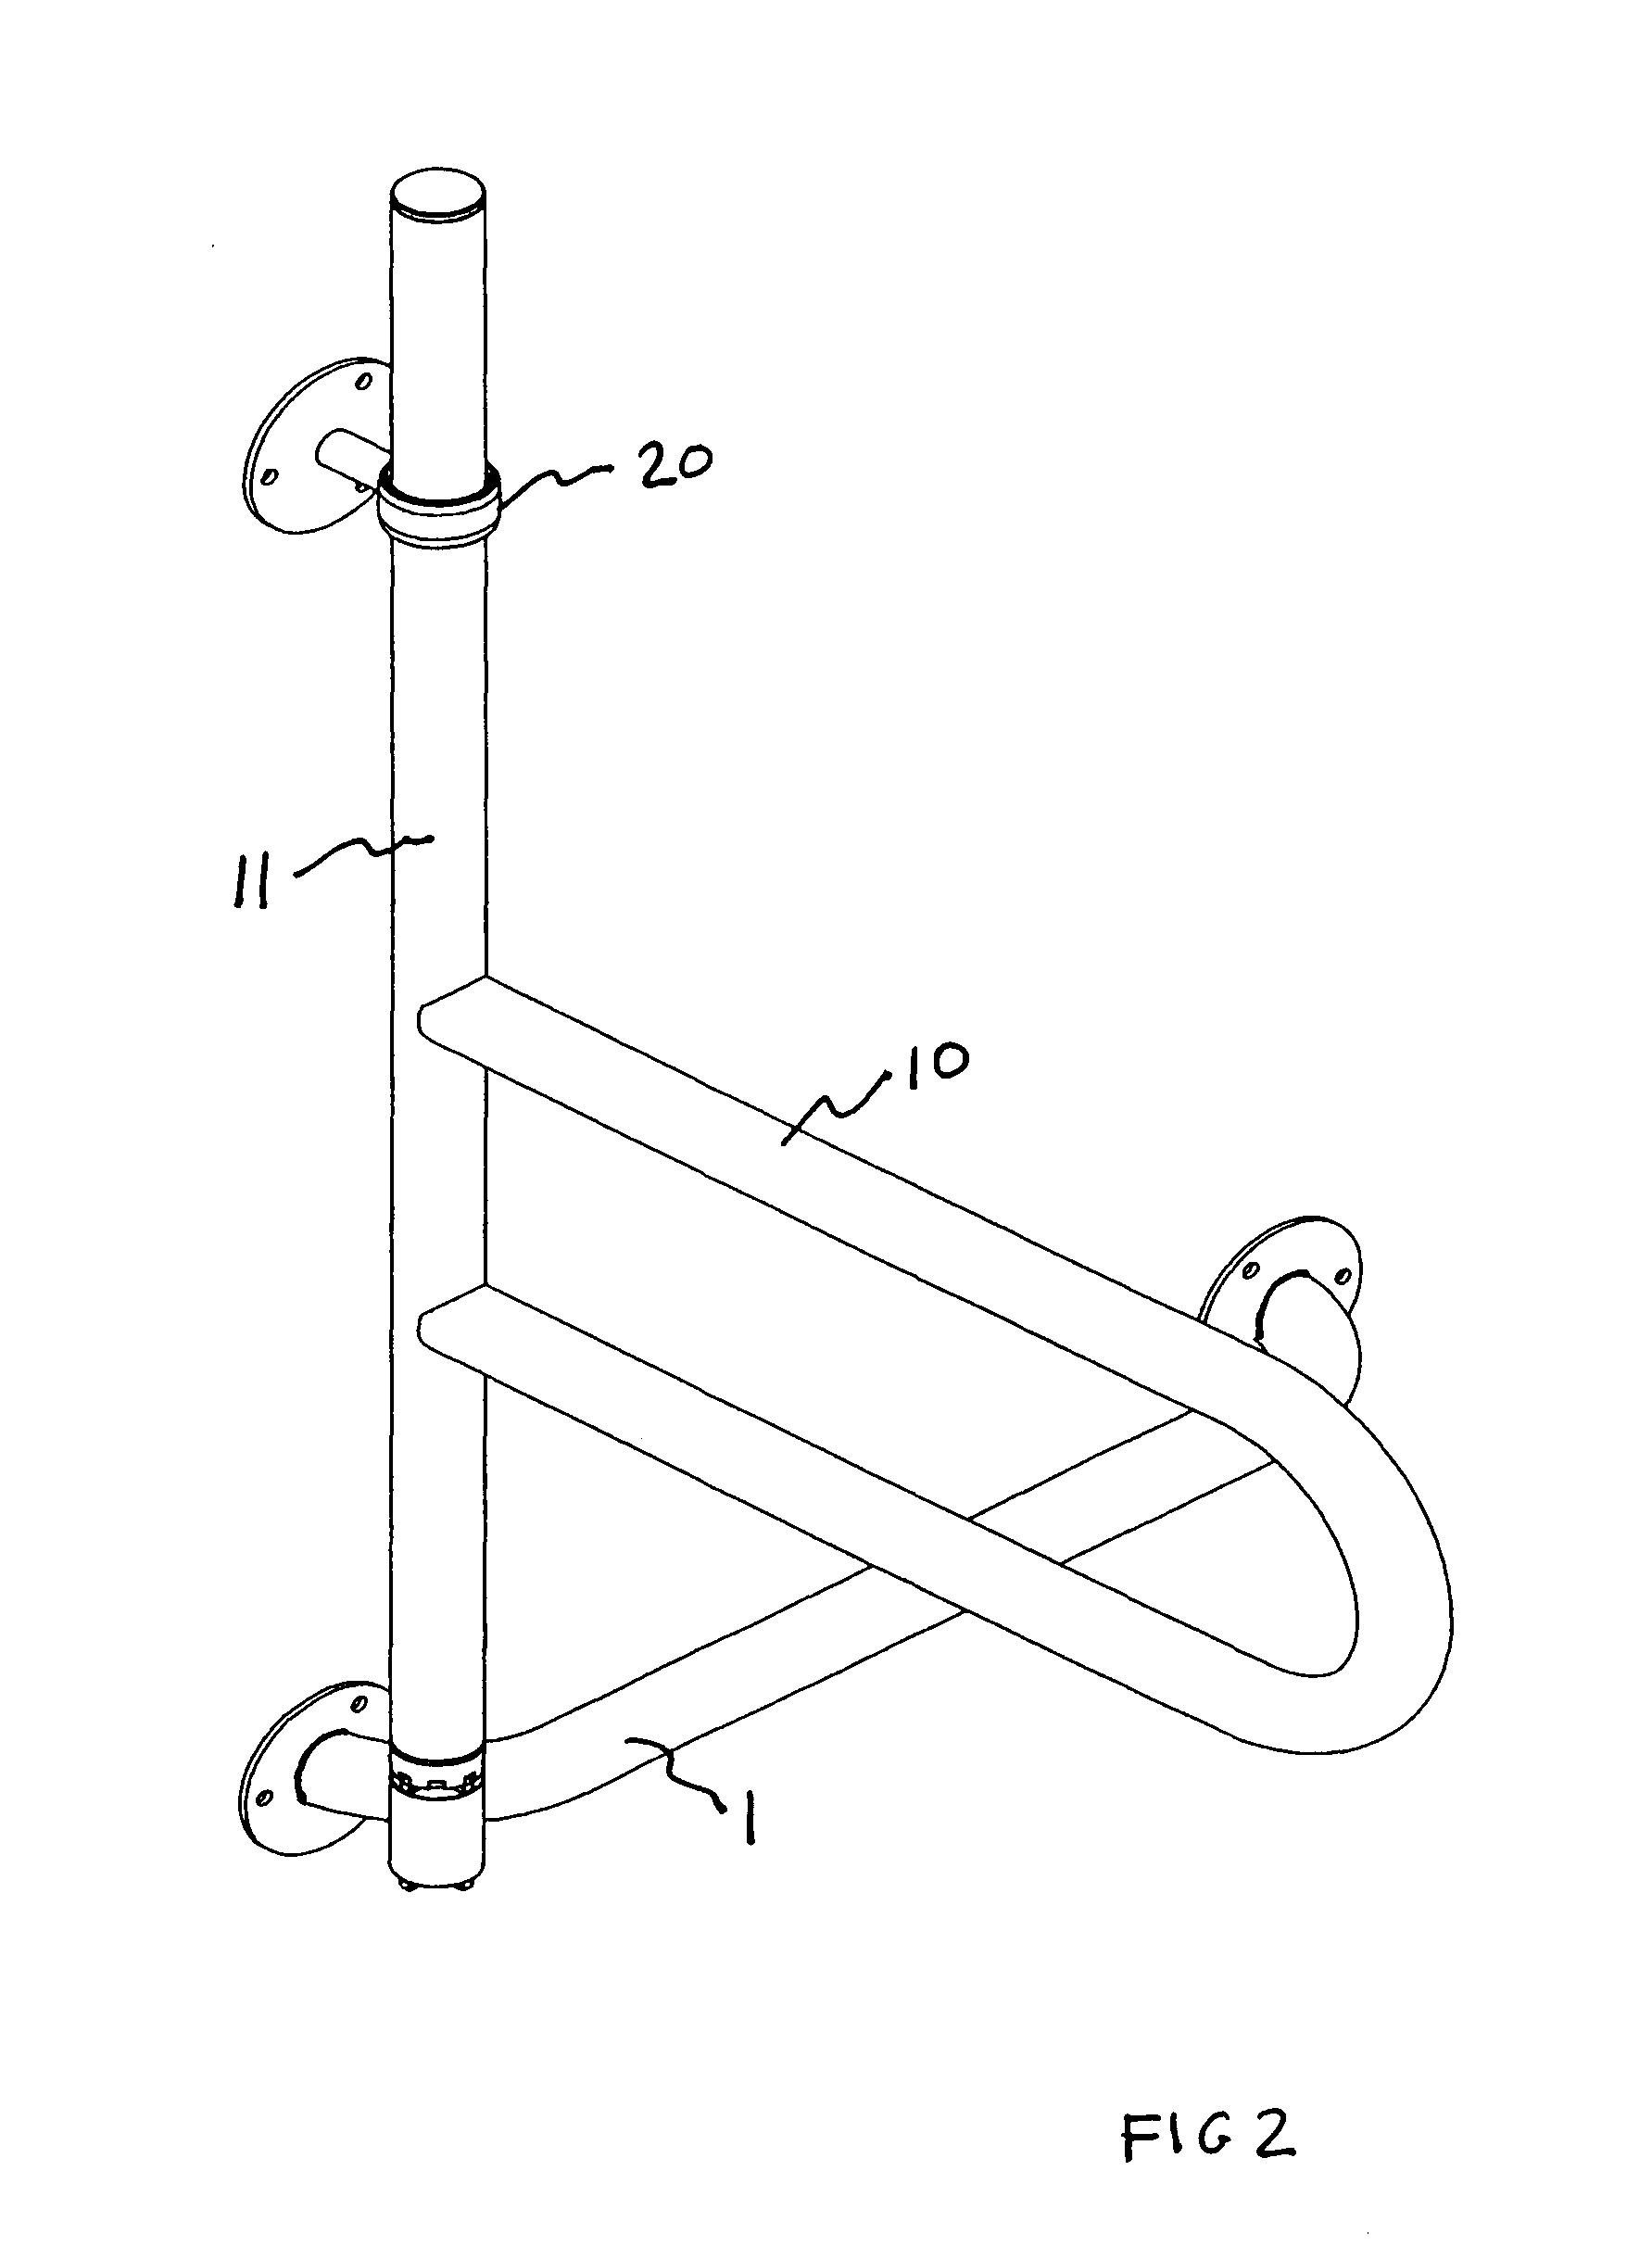 Pivoting and locking wall mounted support rail for elderly and disabled persons